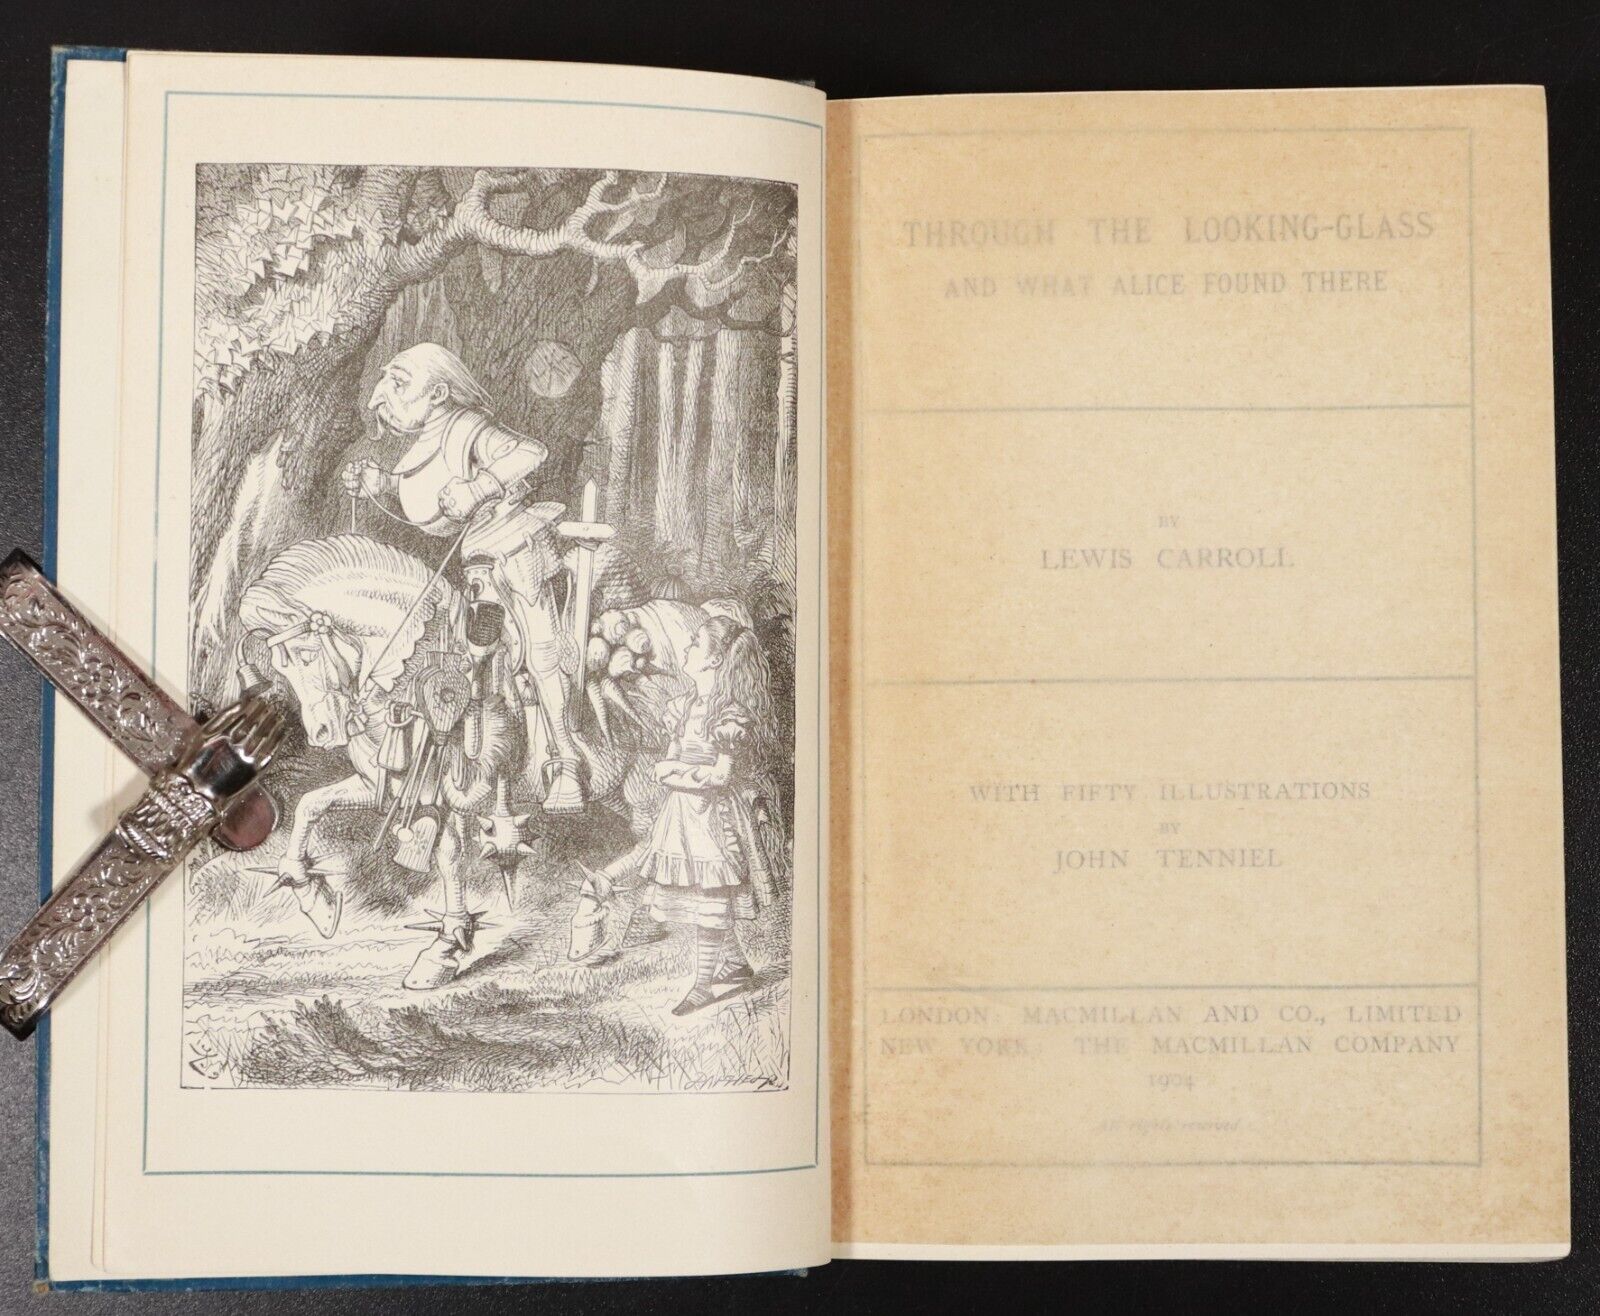 1904 Through The Looking-Glass by Lewis Carroll Antique Illustrated Fiction Book